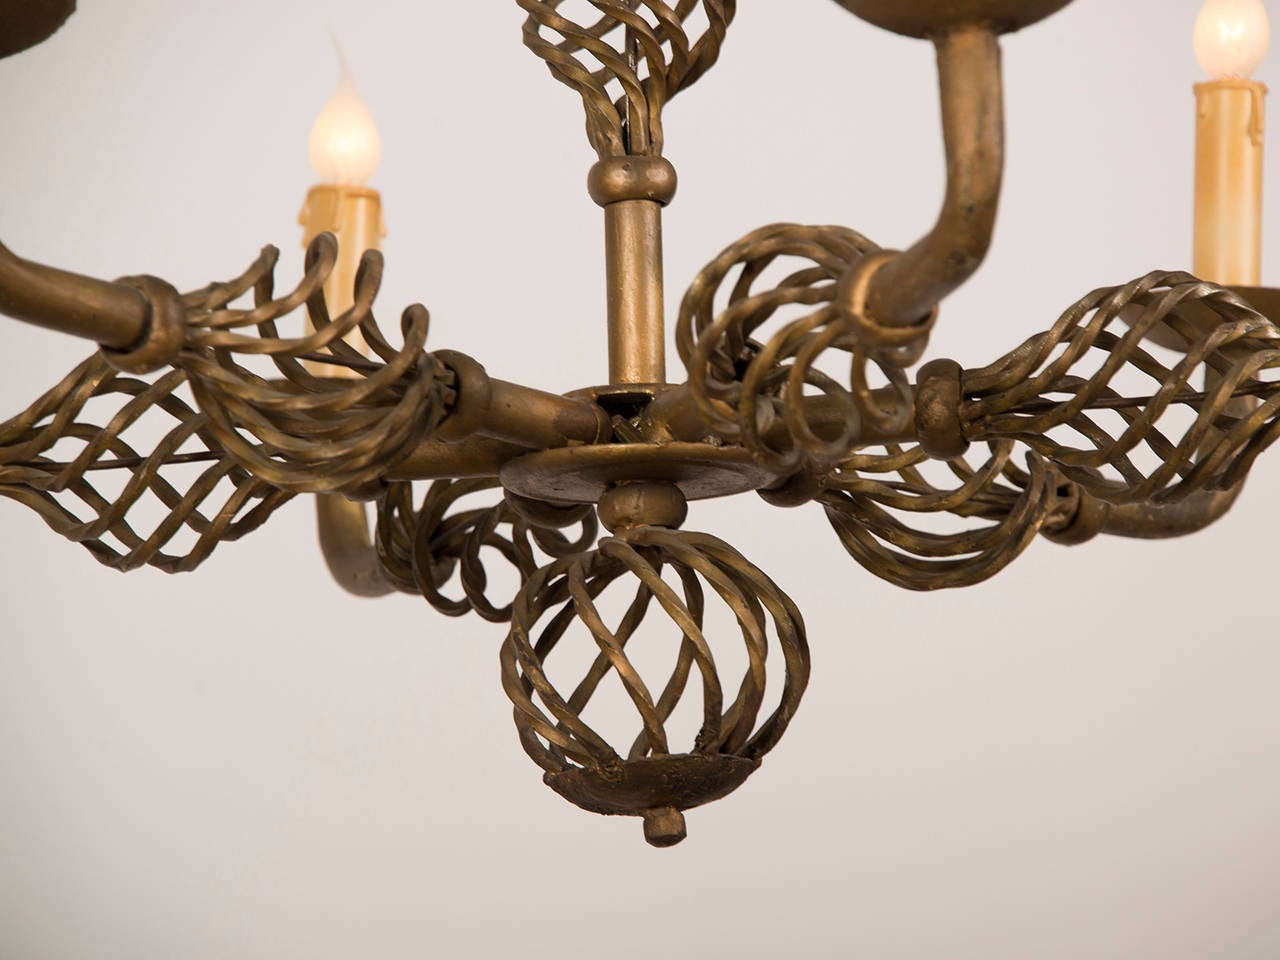 French Provincial Gilded, Forged Iron Six-Light Vintage French Chandelier, circa 1930